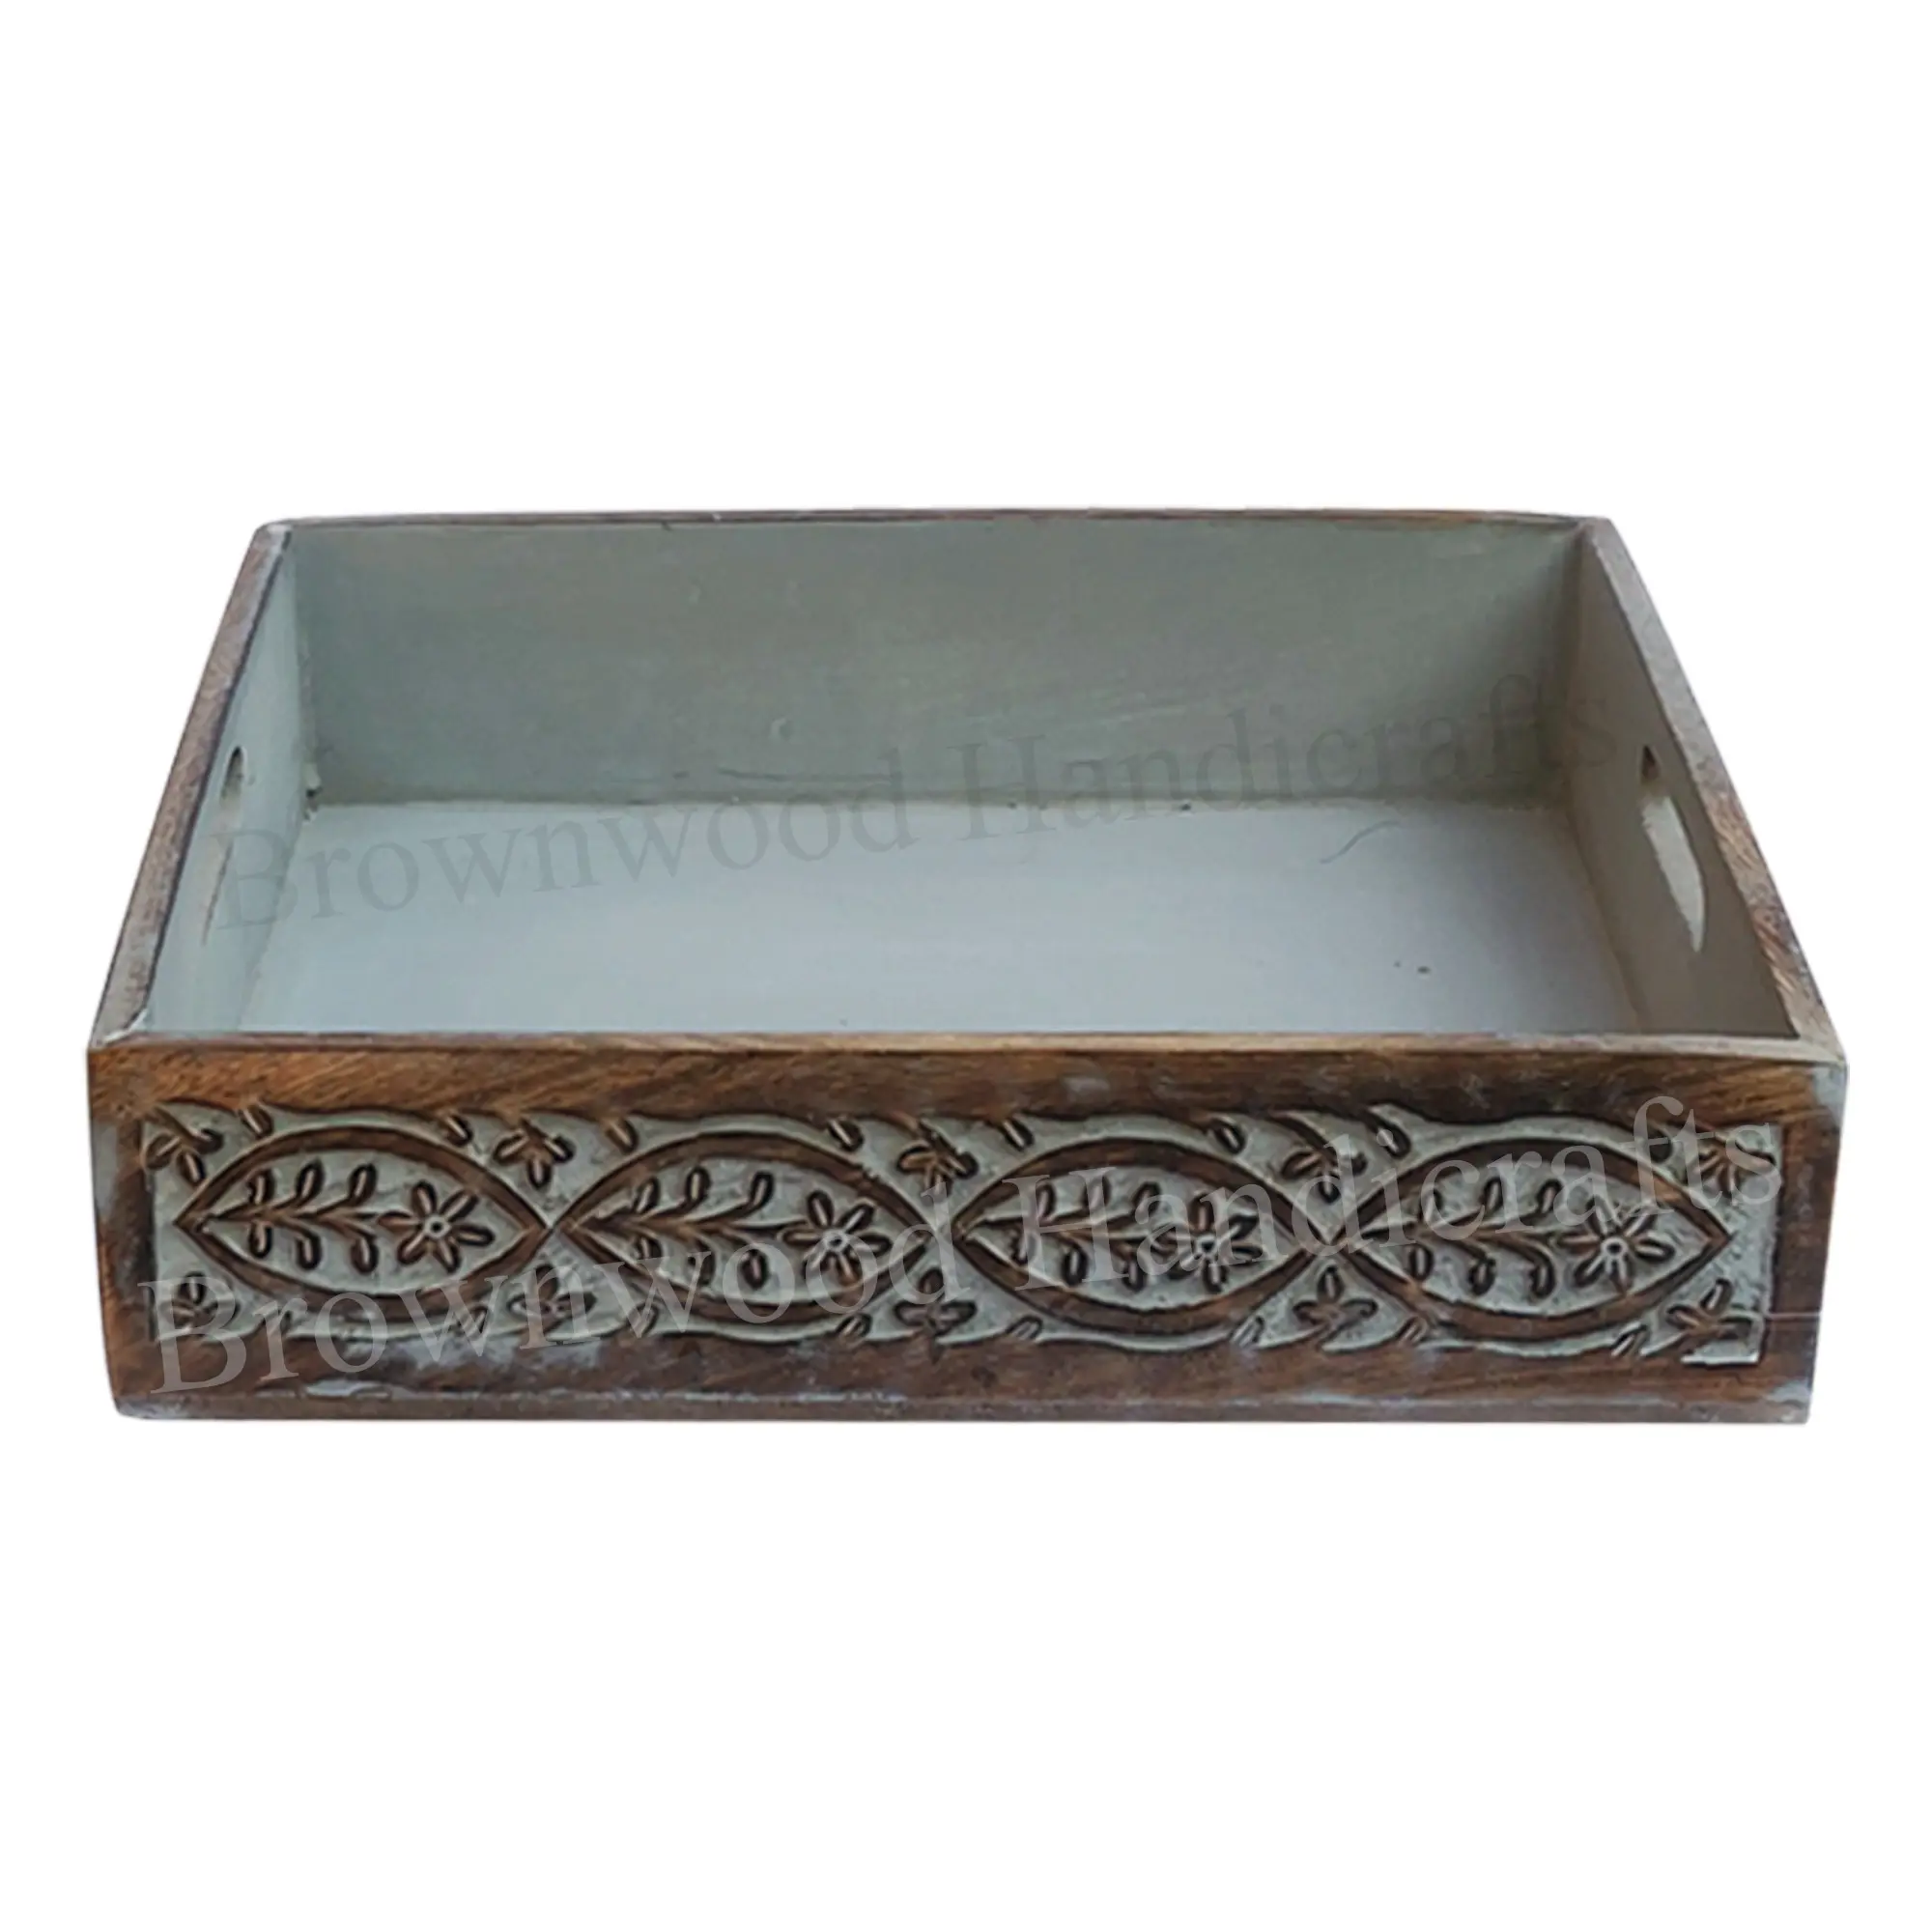 Top Selling Best Quality Mango Wood Serving Tray Wooden Snacks Serving Tray Decor Tray From Bulk Manufacturer & Supplier